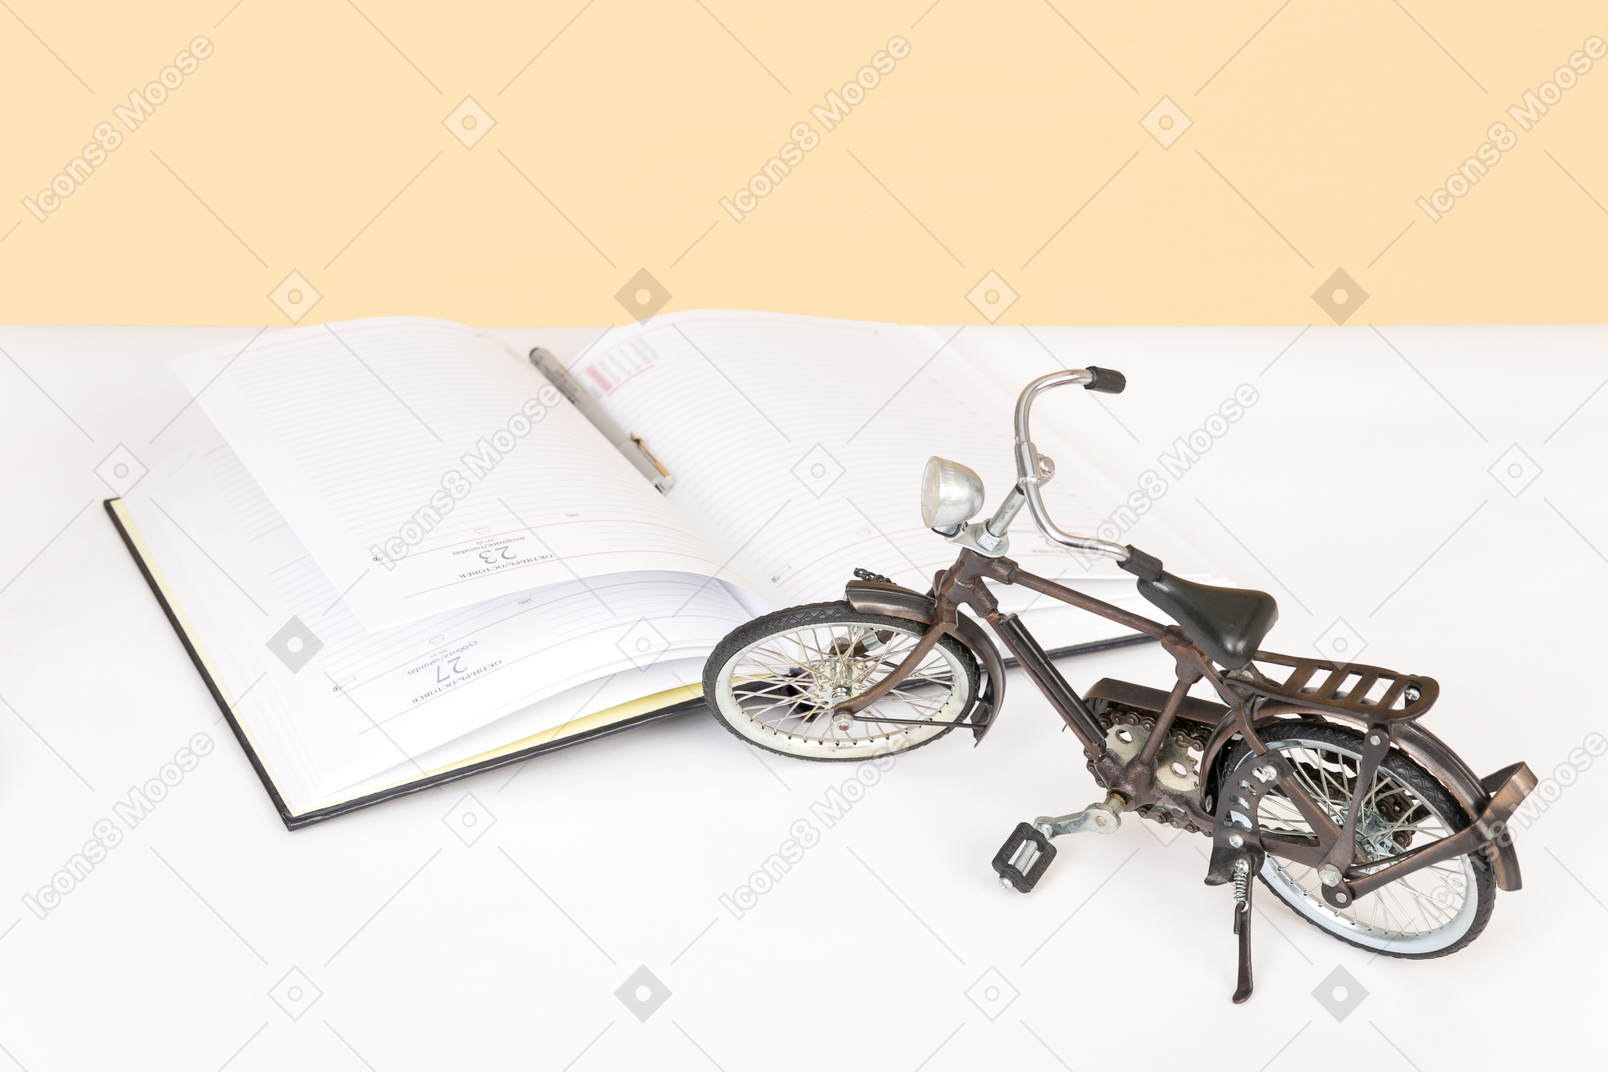 Black desk lamp, open book and toy bicycle